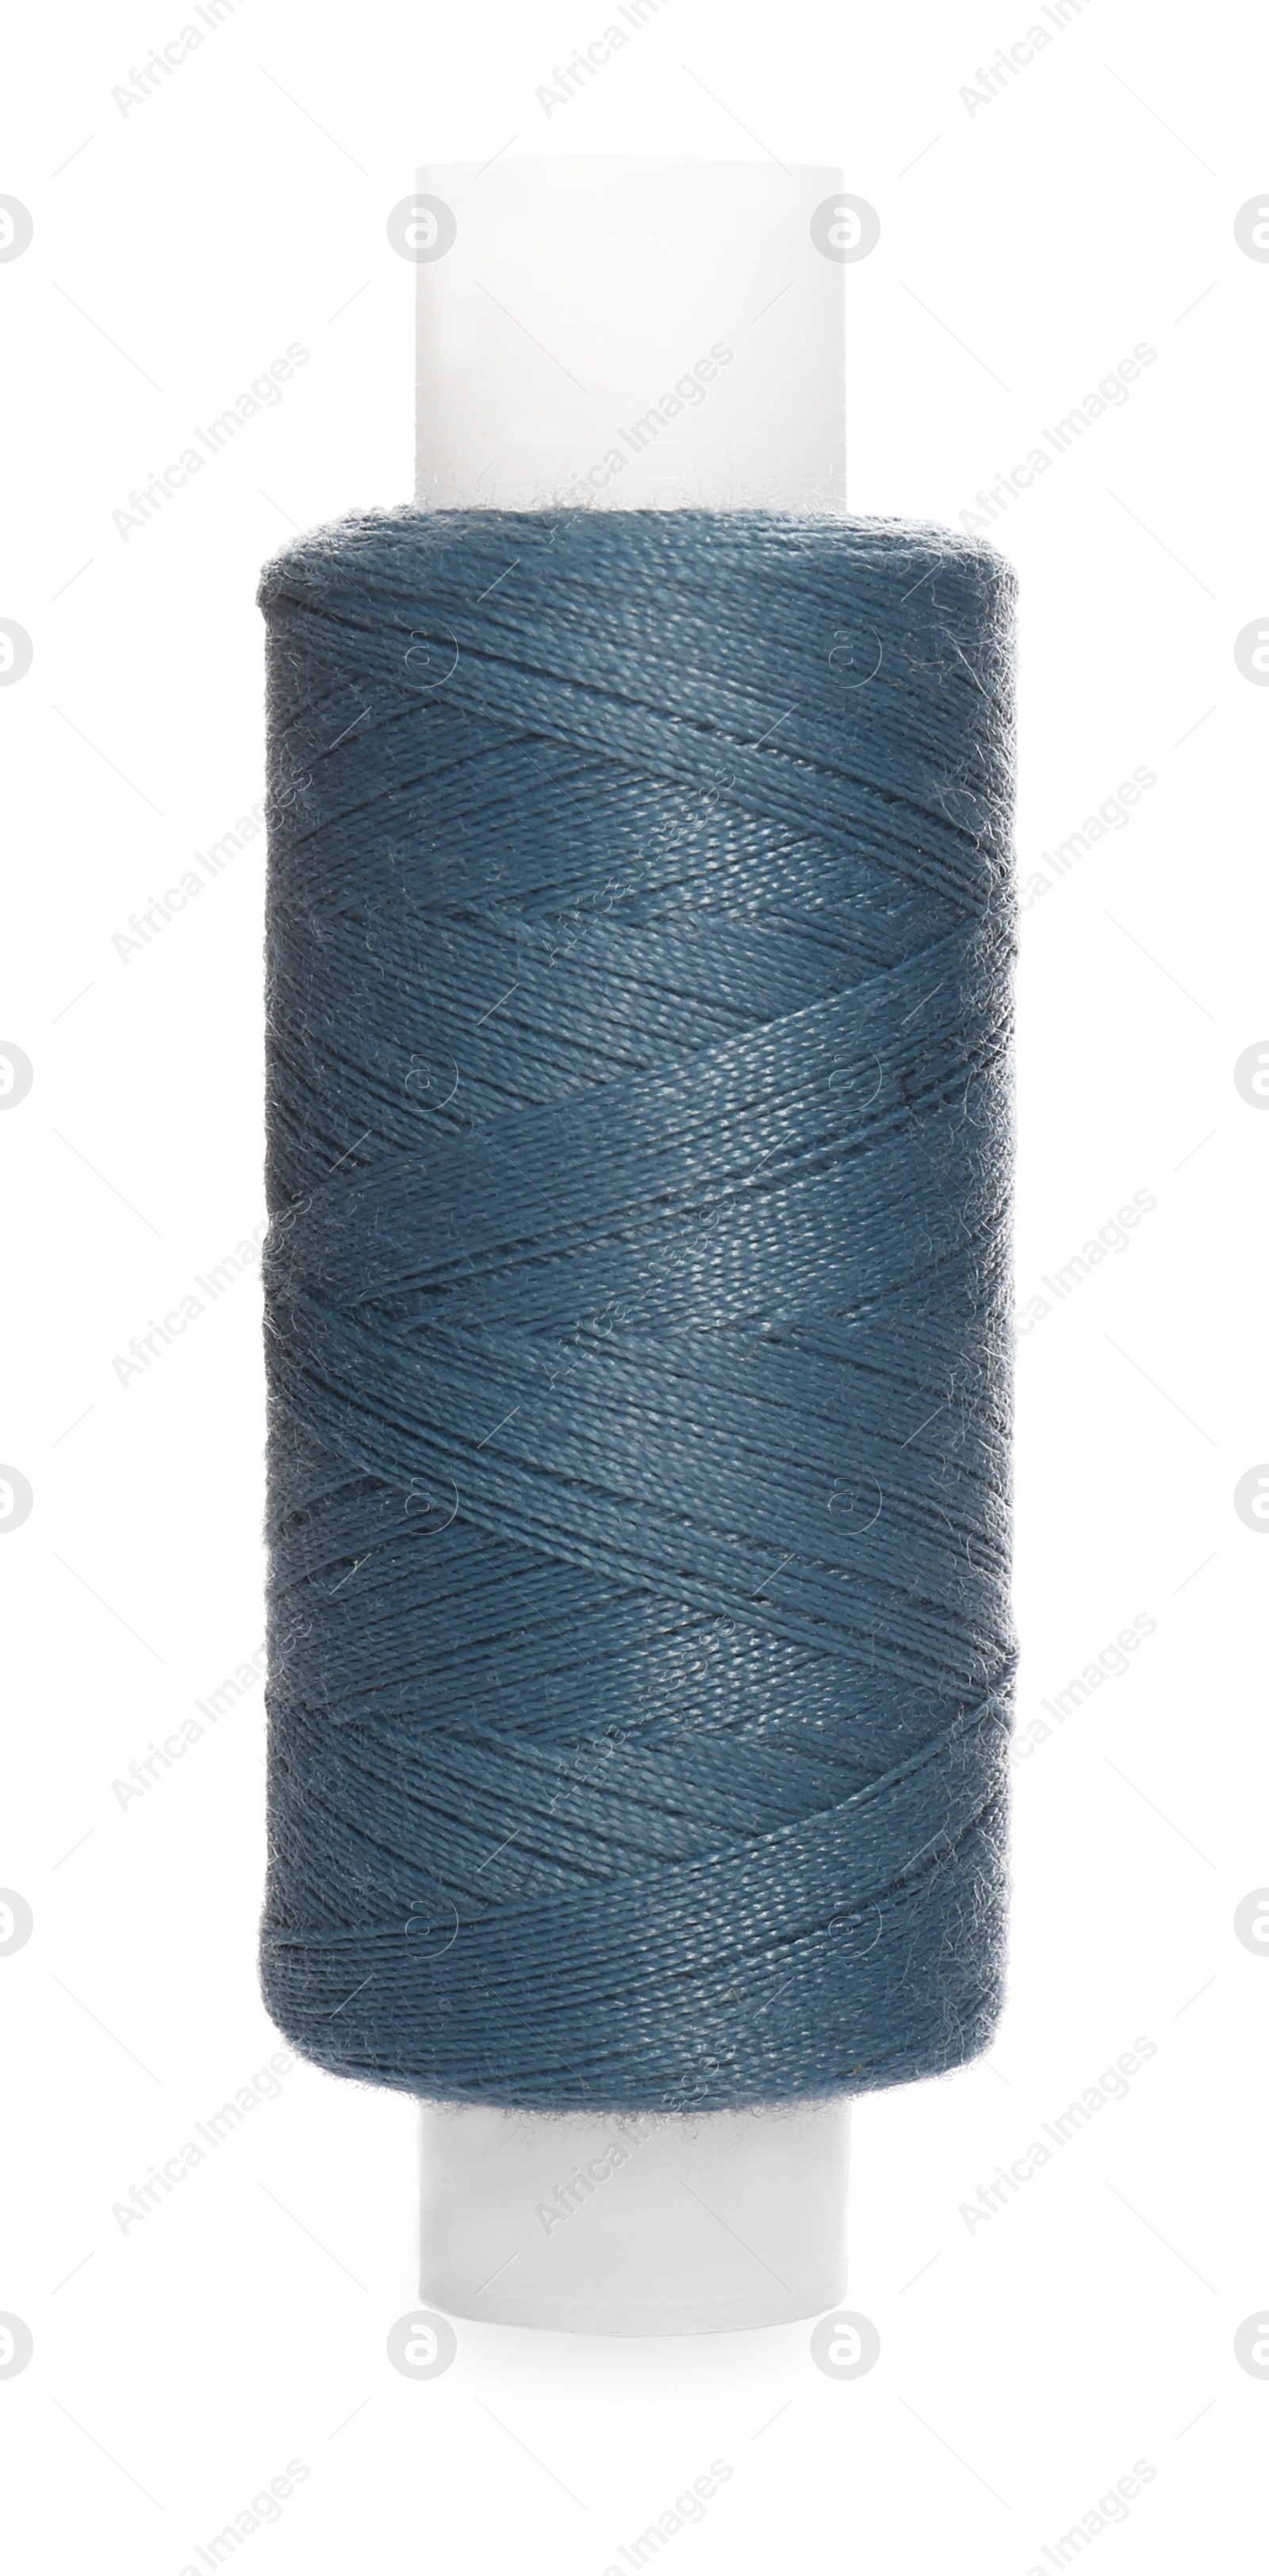 Photo of Spool of steel blue sewing thread isolated on white